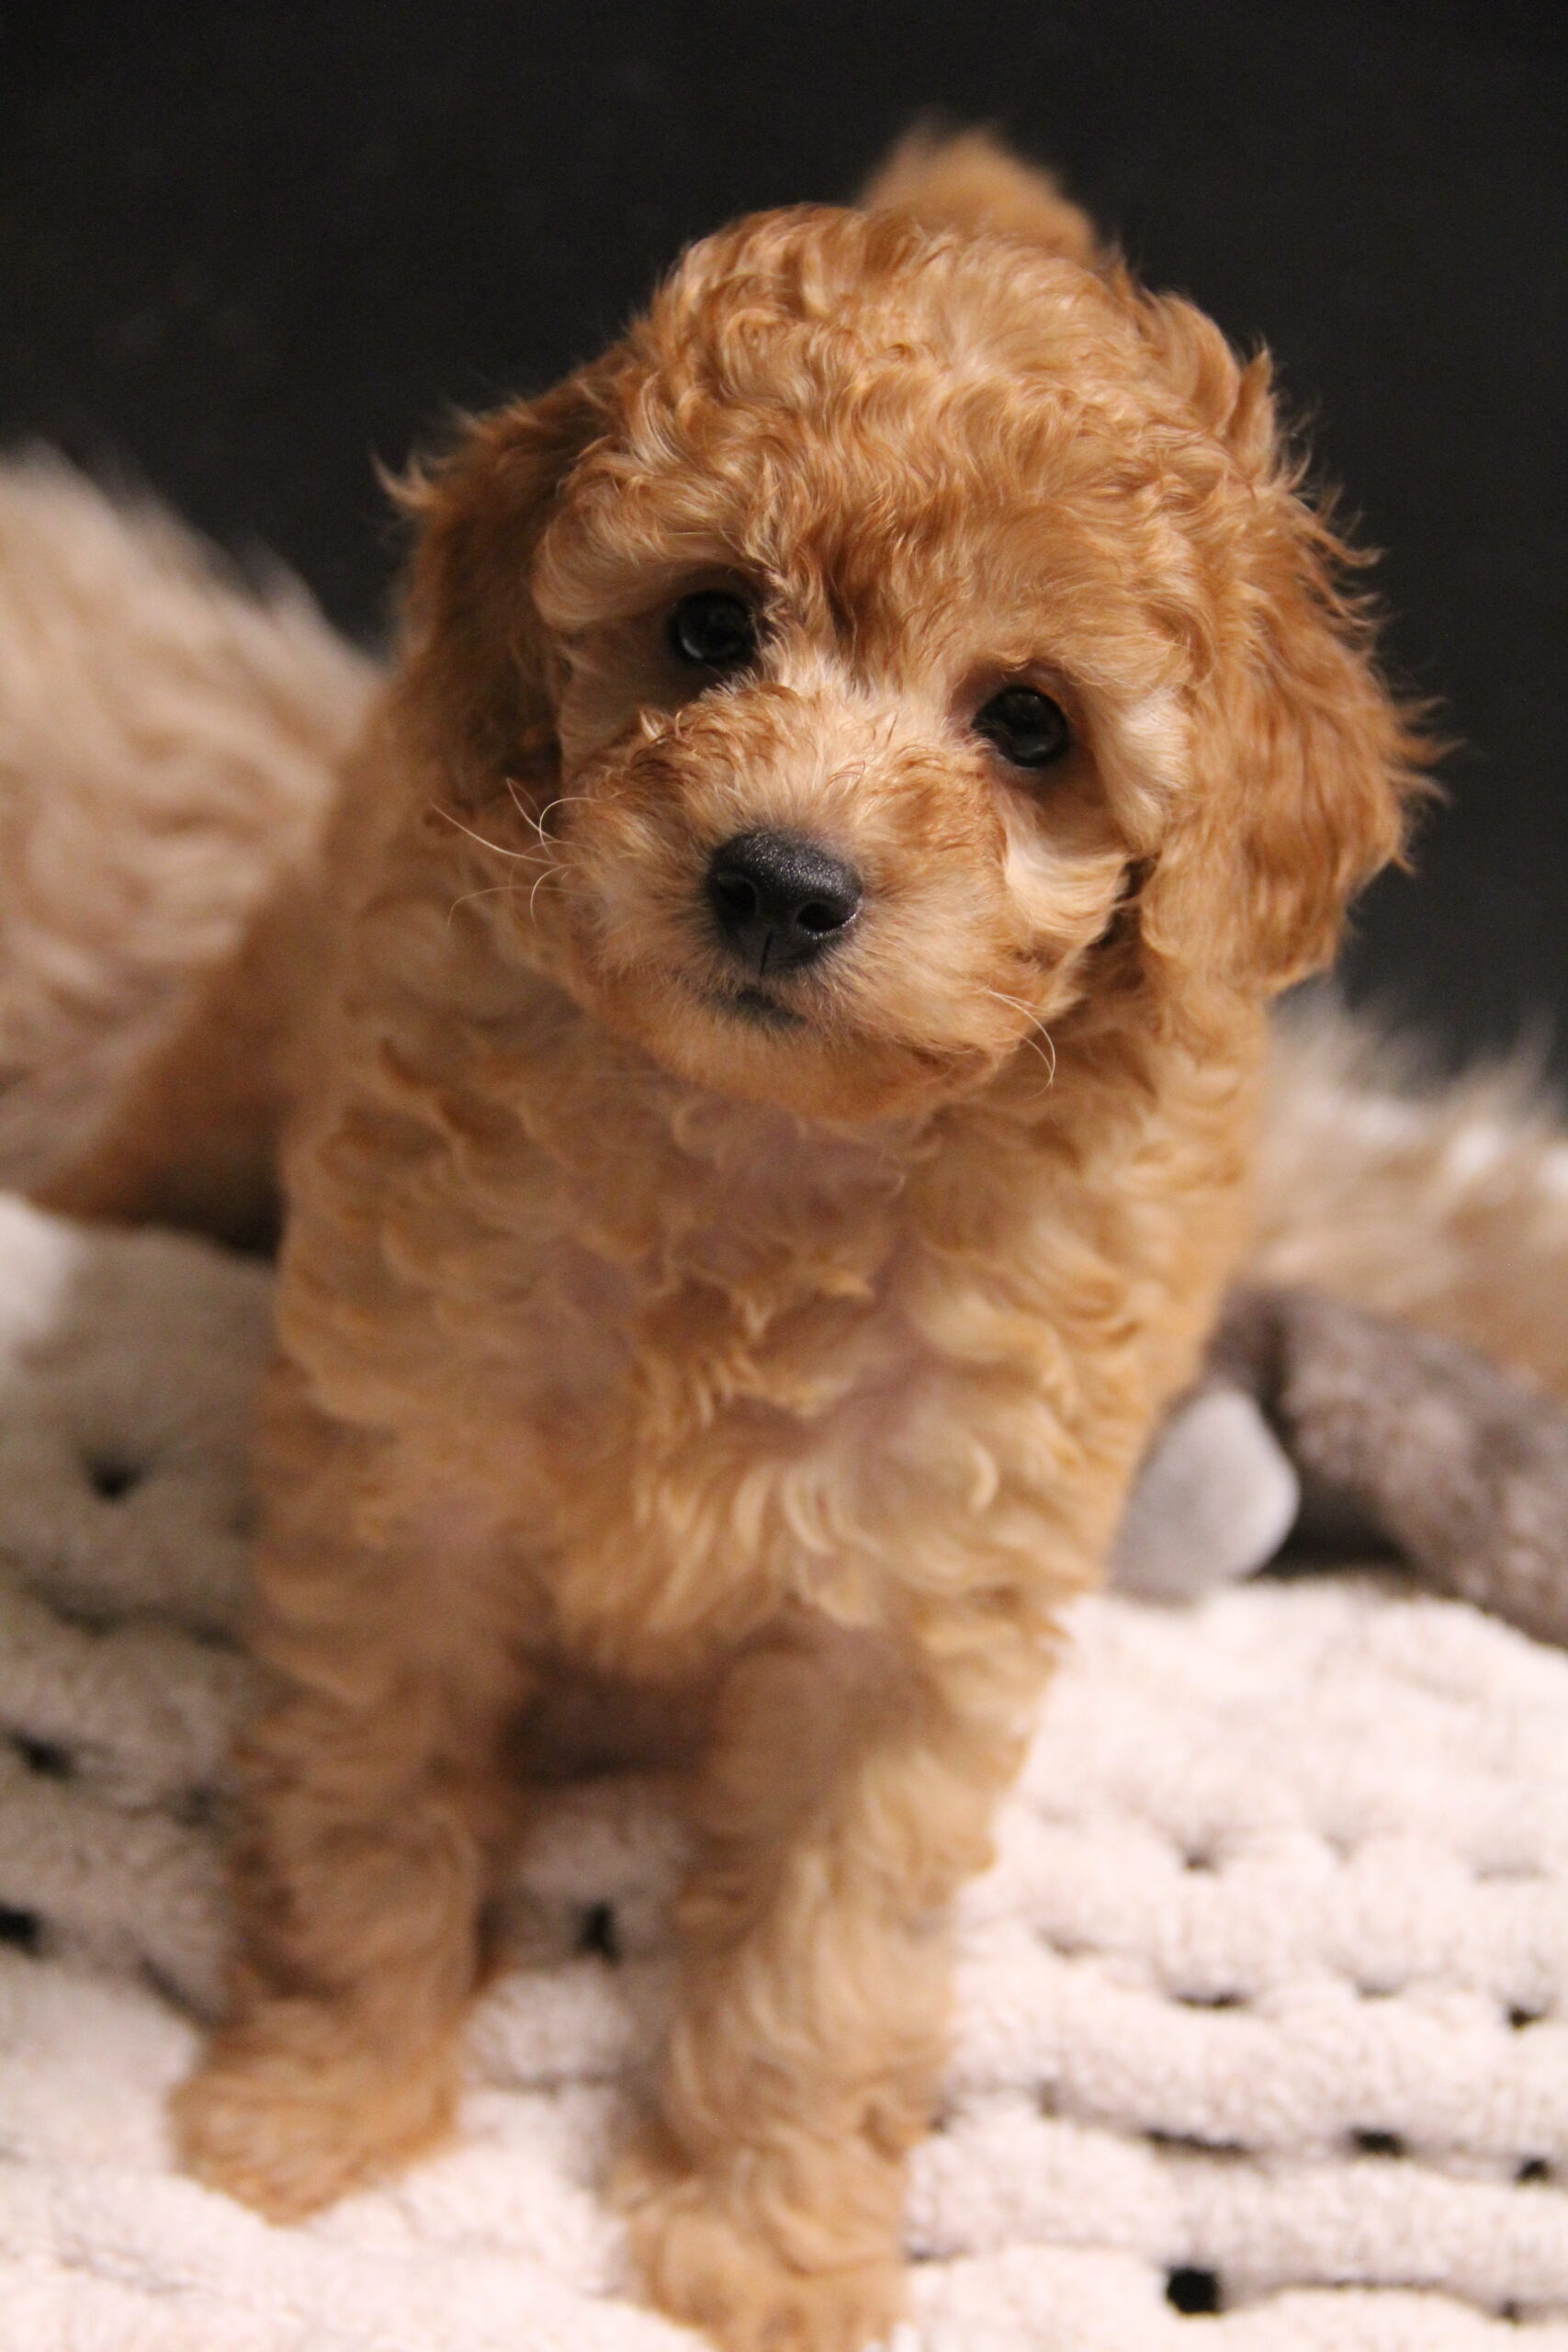 Prince Male Toy Poodle Family Dog